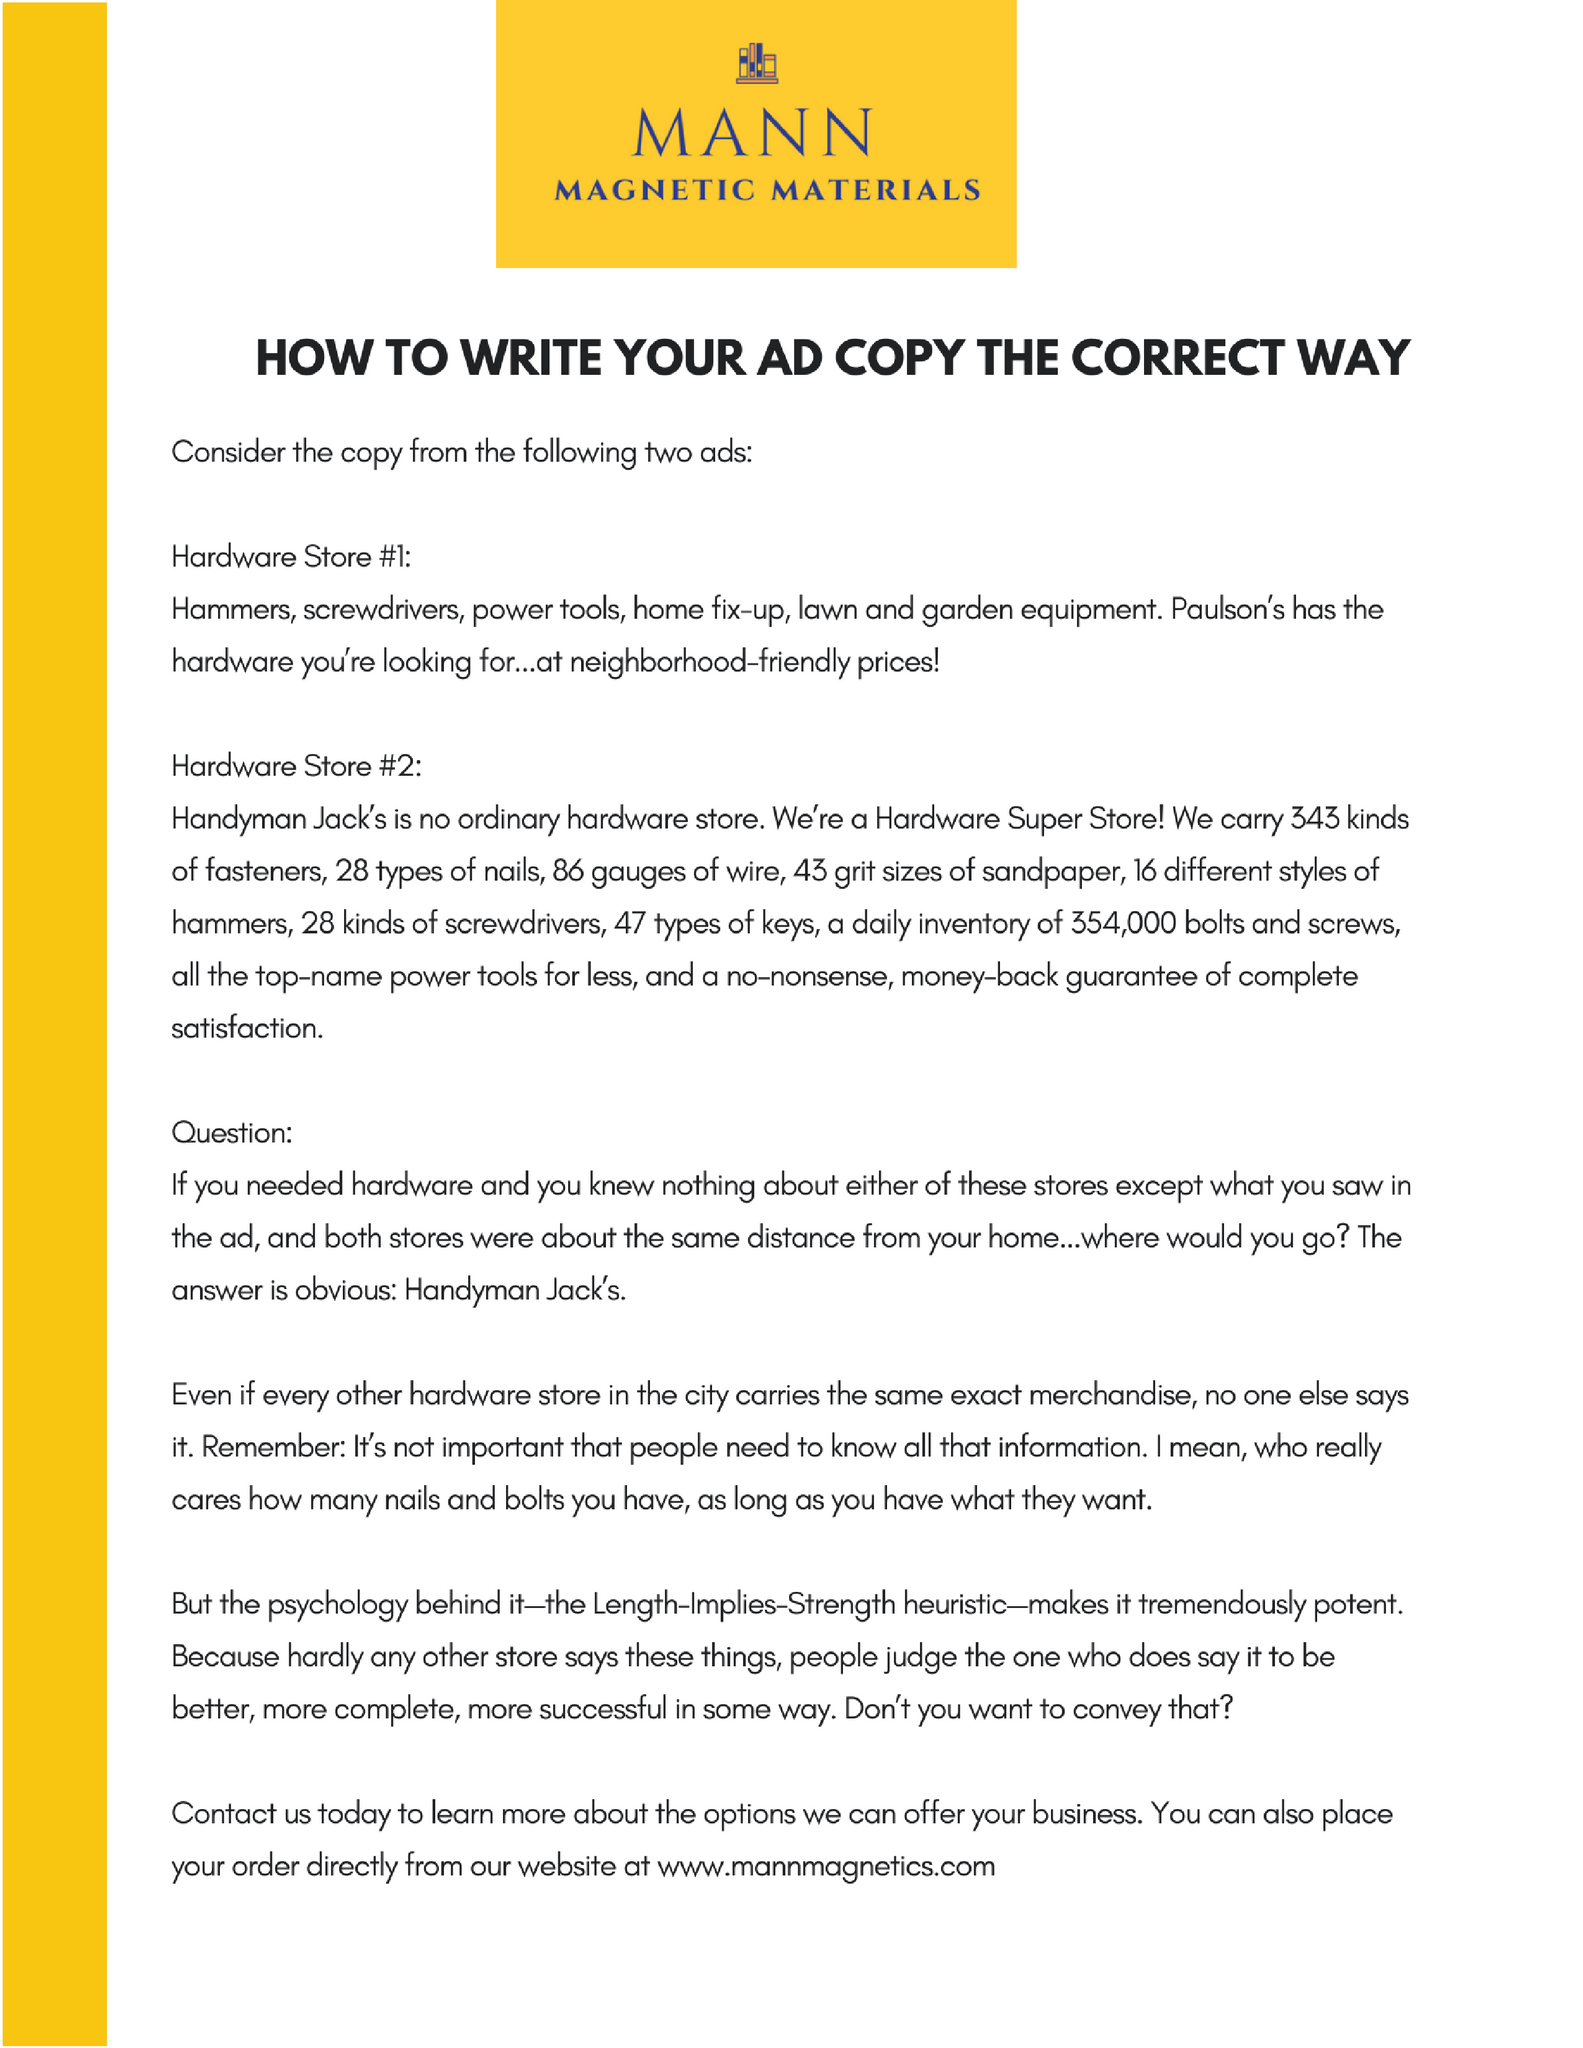 How To Write Your Ad Copy The Correct Way - Mann Magnetic Materials